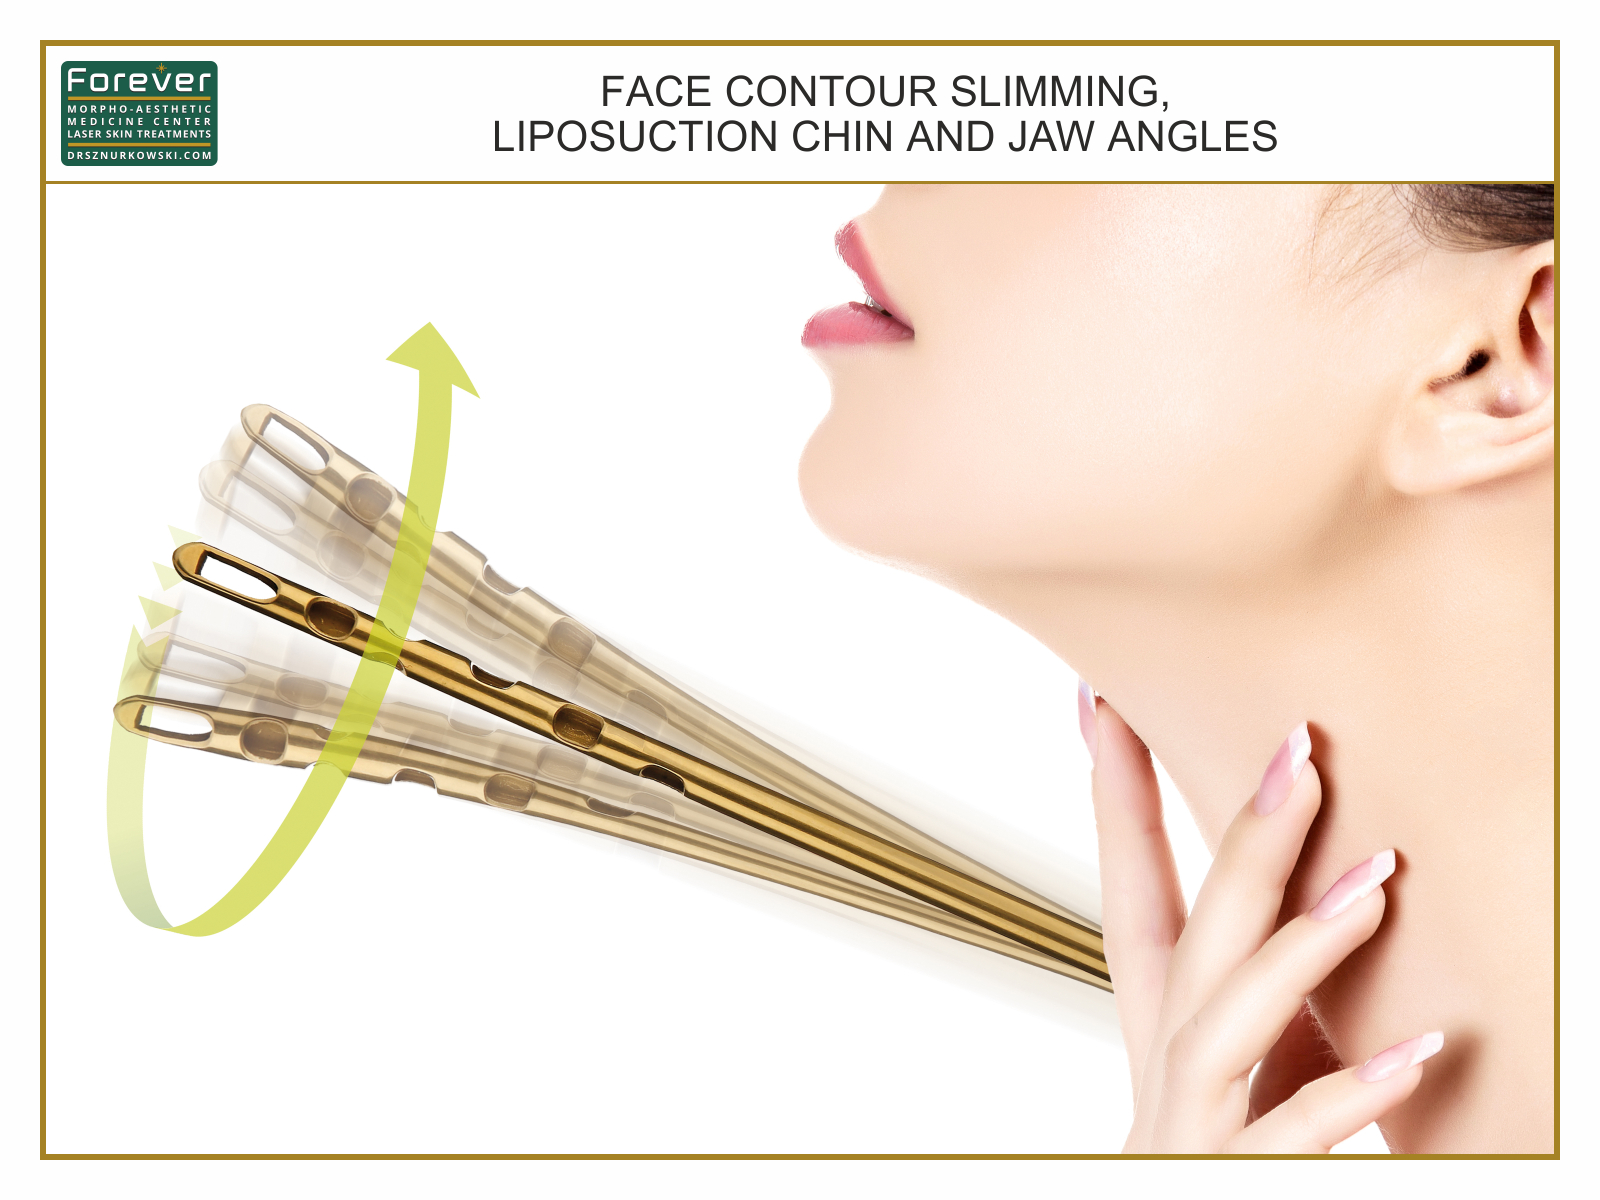 Face Contour Slimming, Liposuction Chin and Jaw Angles.jpg